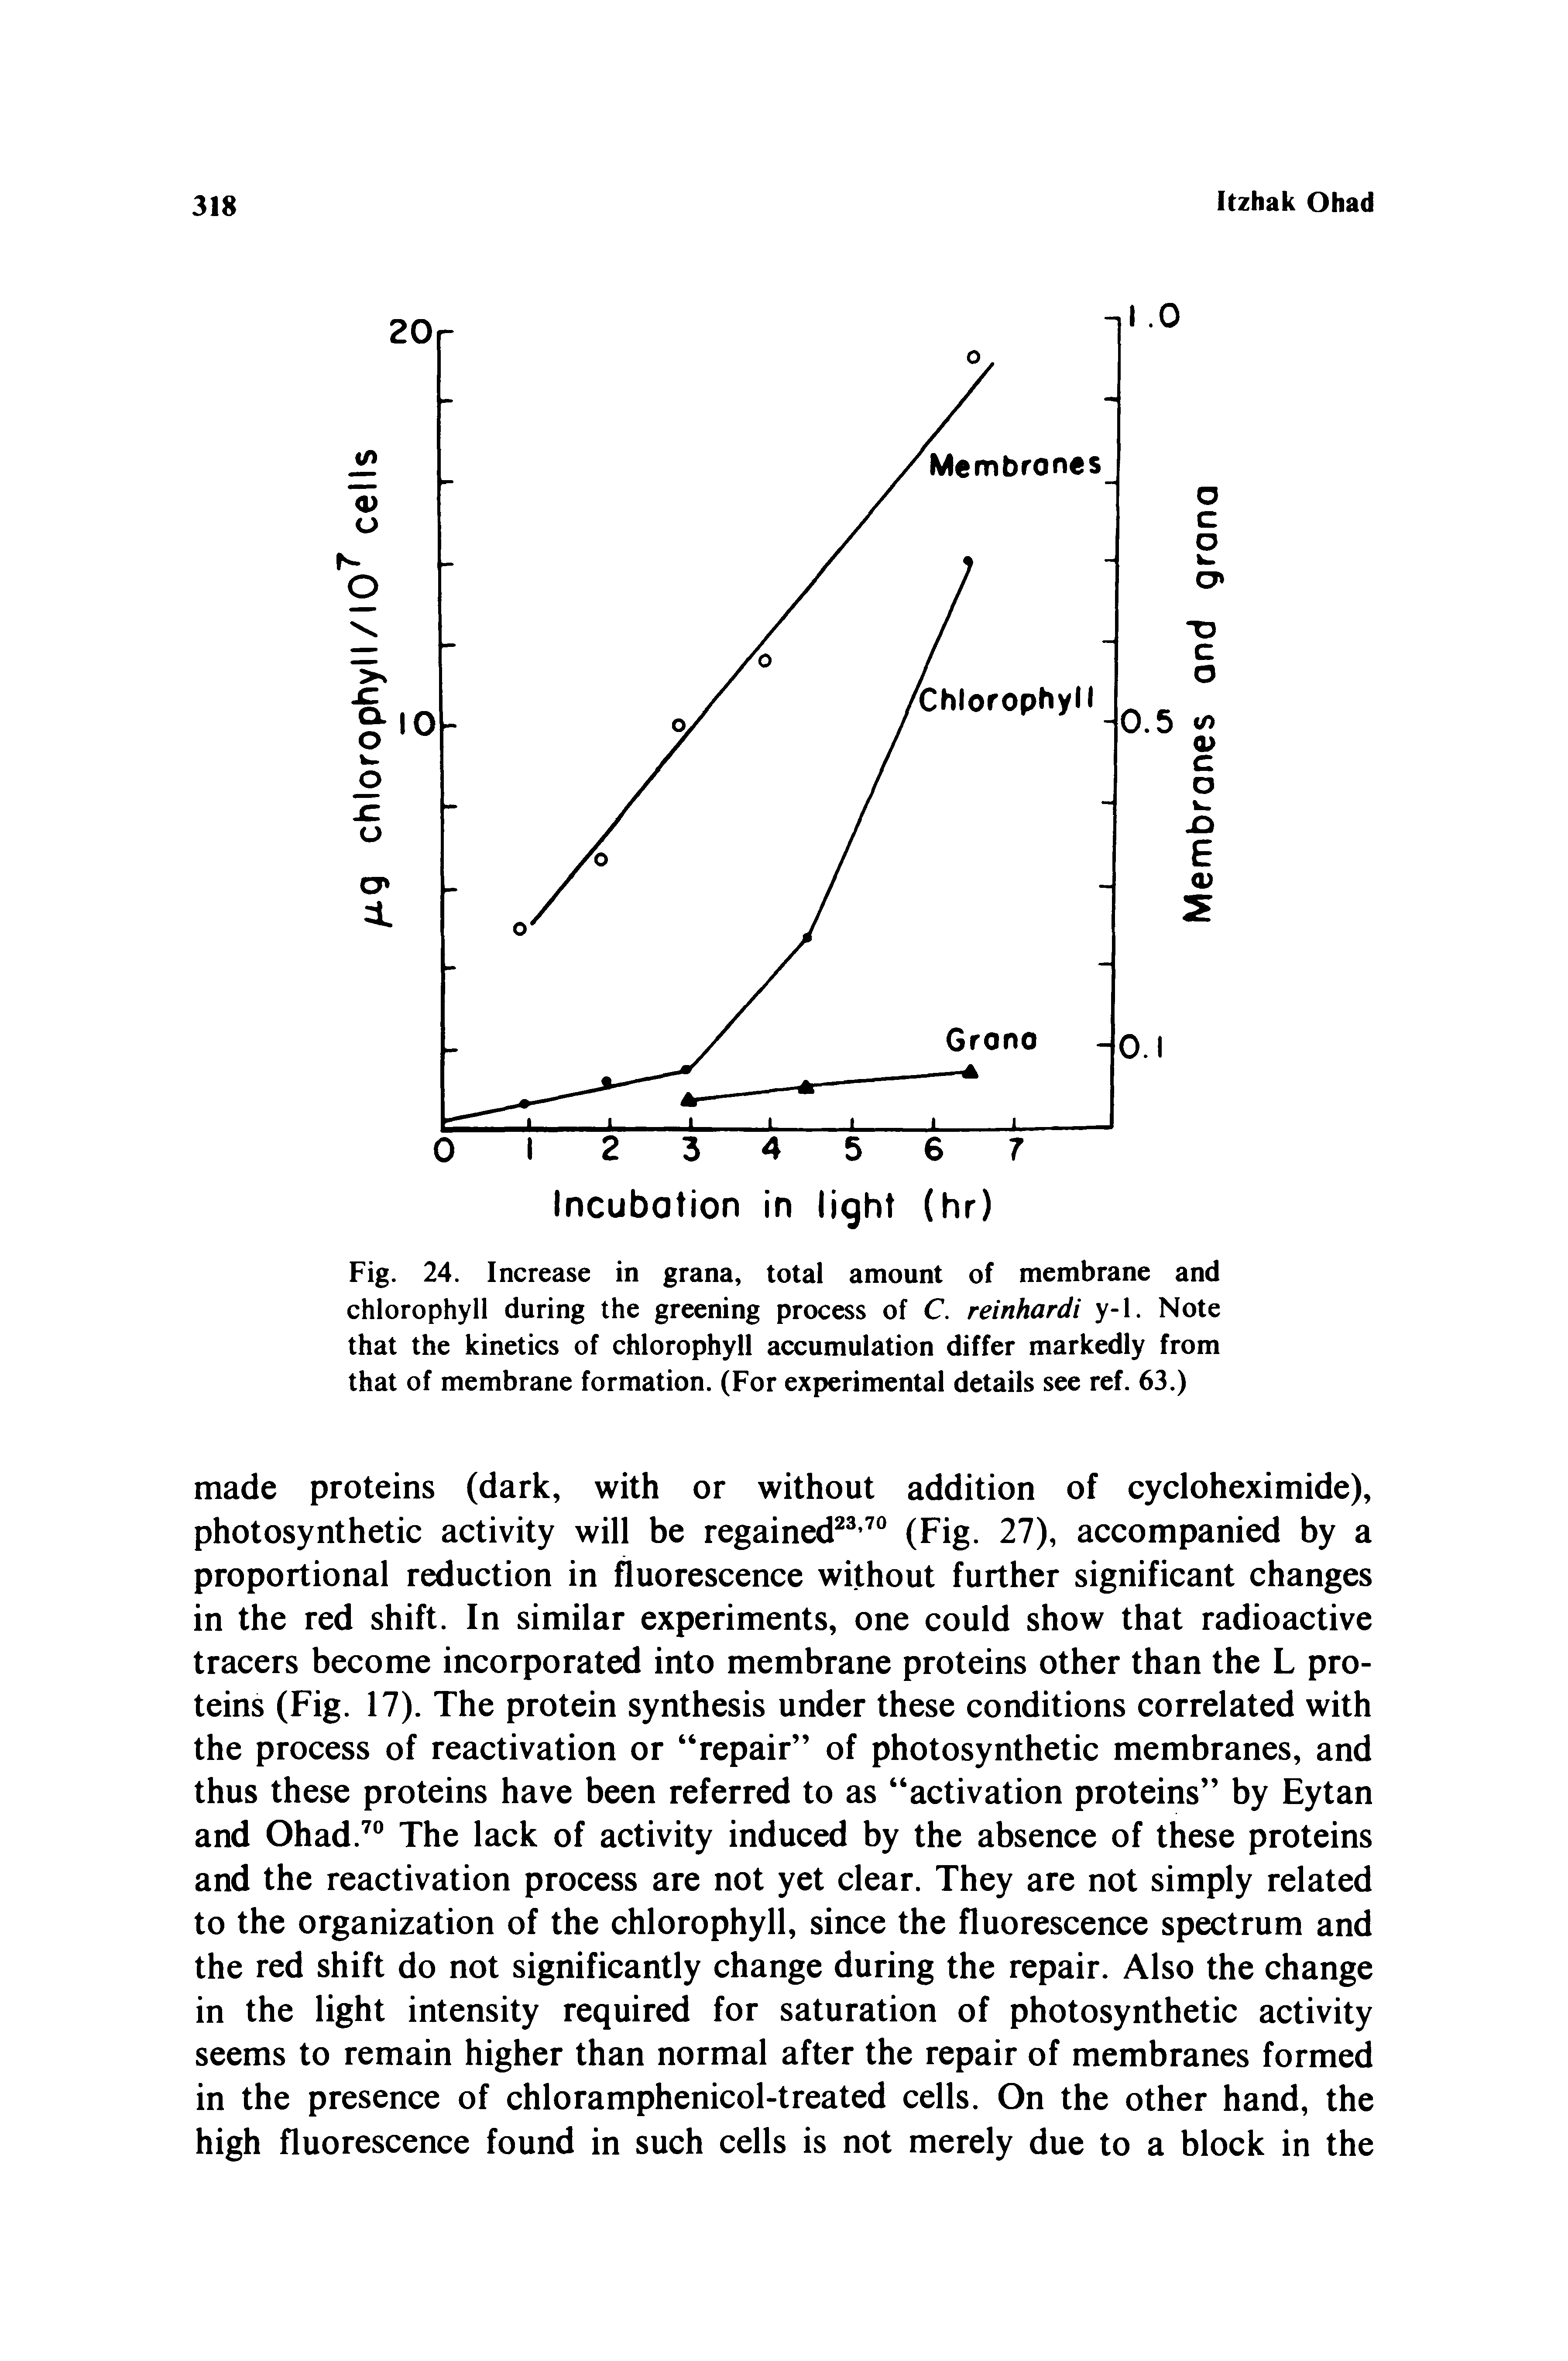 Fig. 24. Increase in grana, total amount of membrane and chlorophyll during the greening process of C. reinhardi y-1. Note that the kinetics of chlorophyll accumulation differ markedly from that of membrane formation. (For experimental details see ref. 63.)...